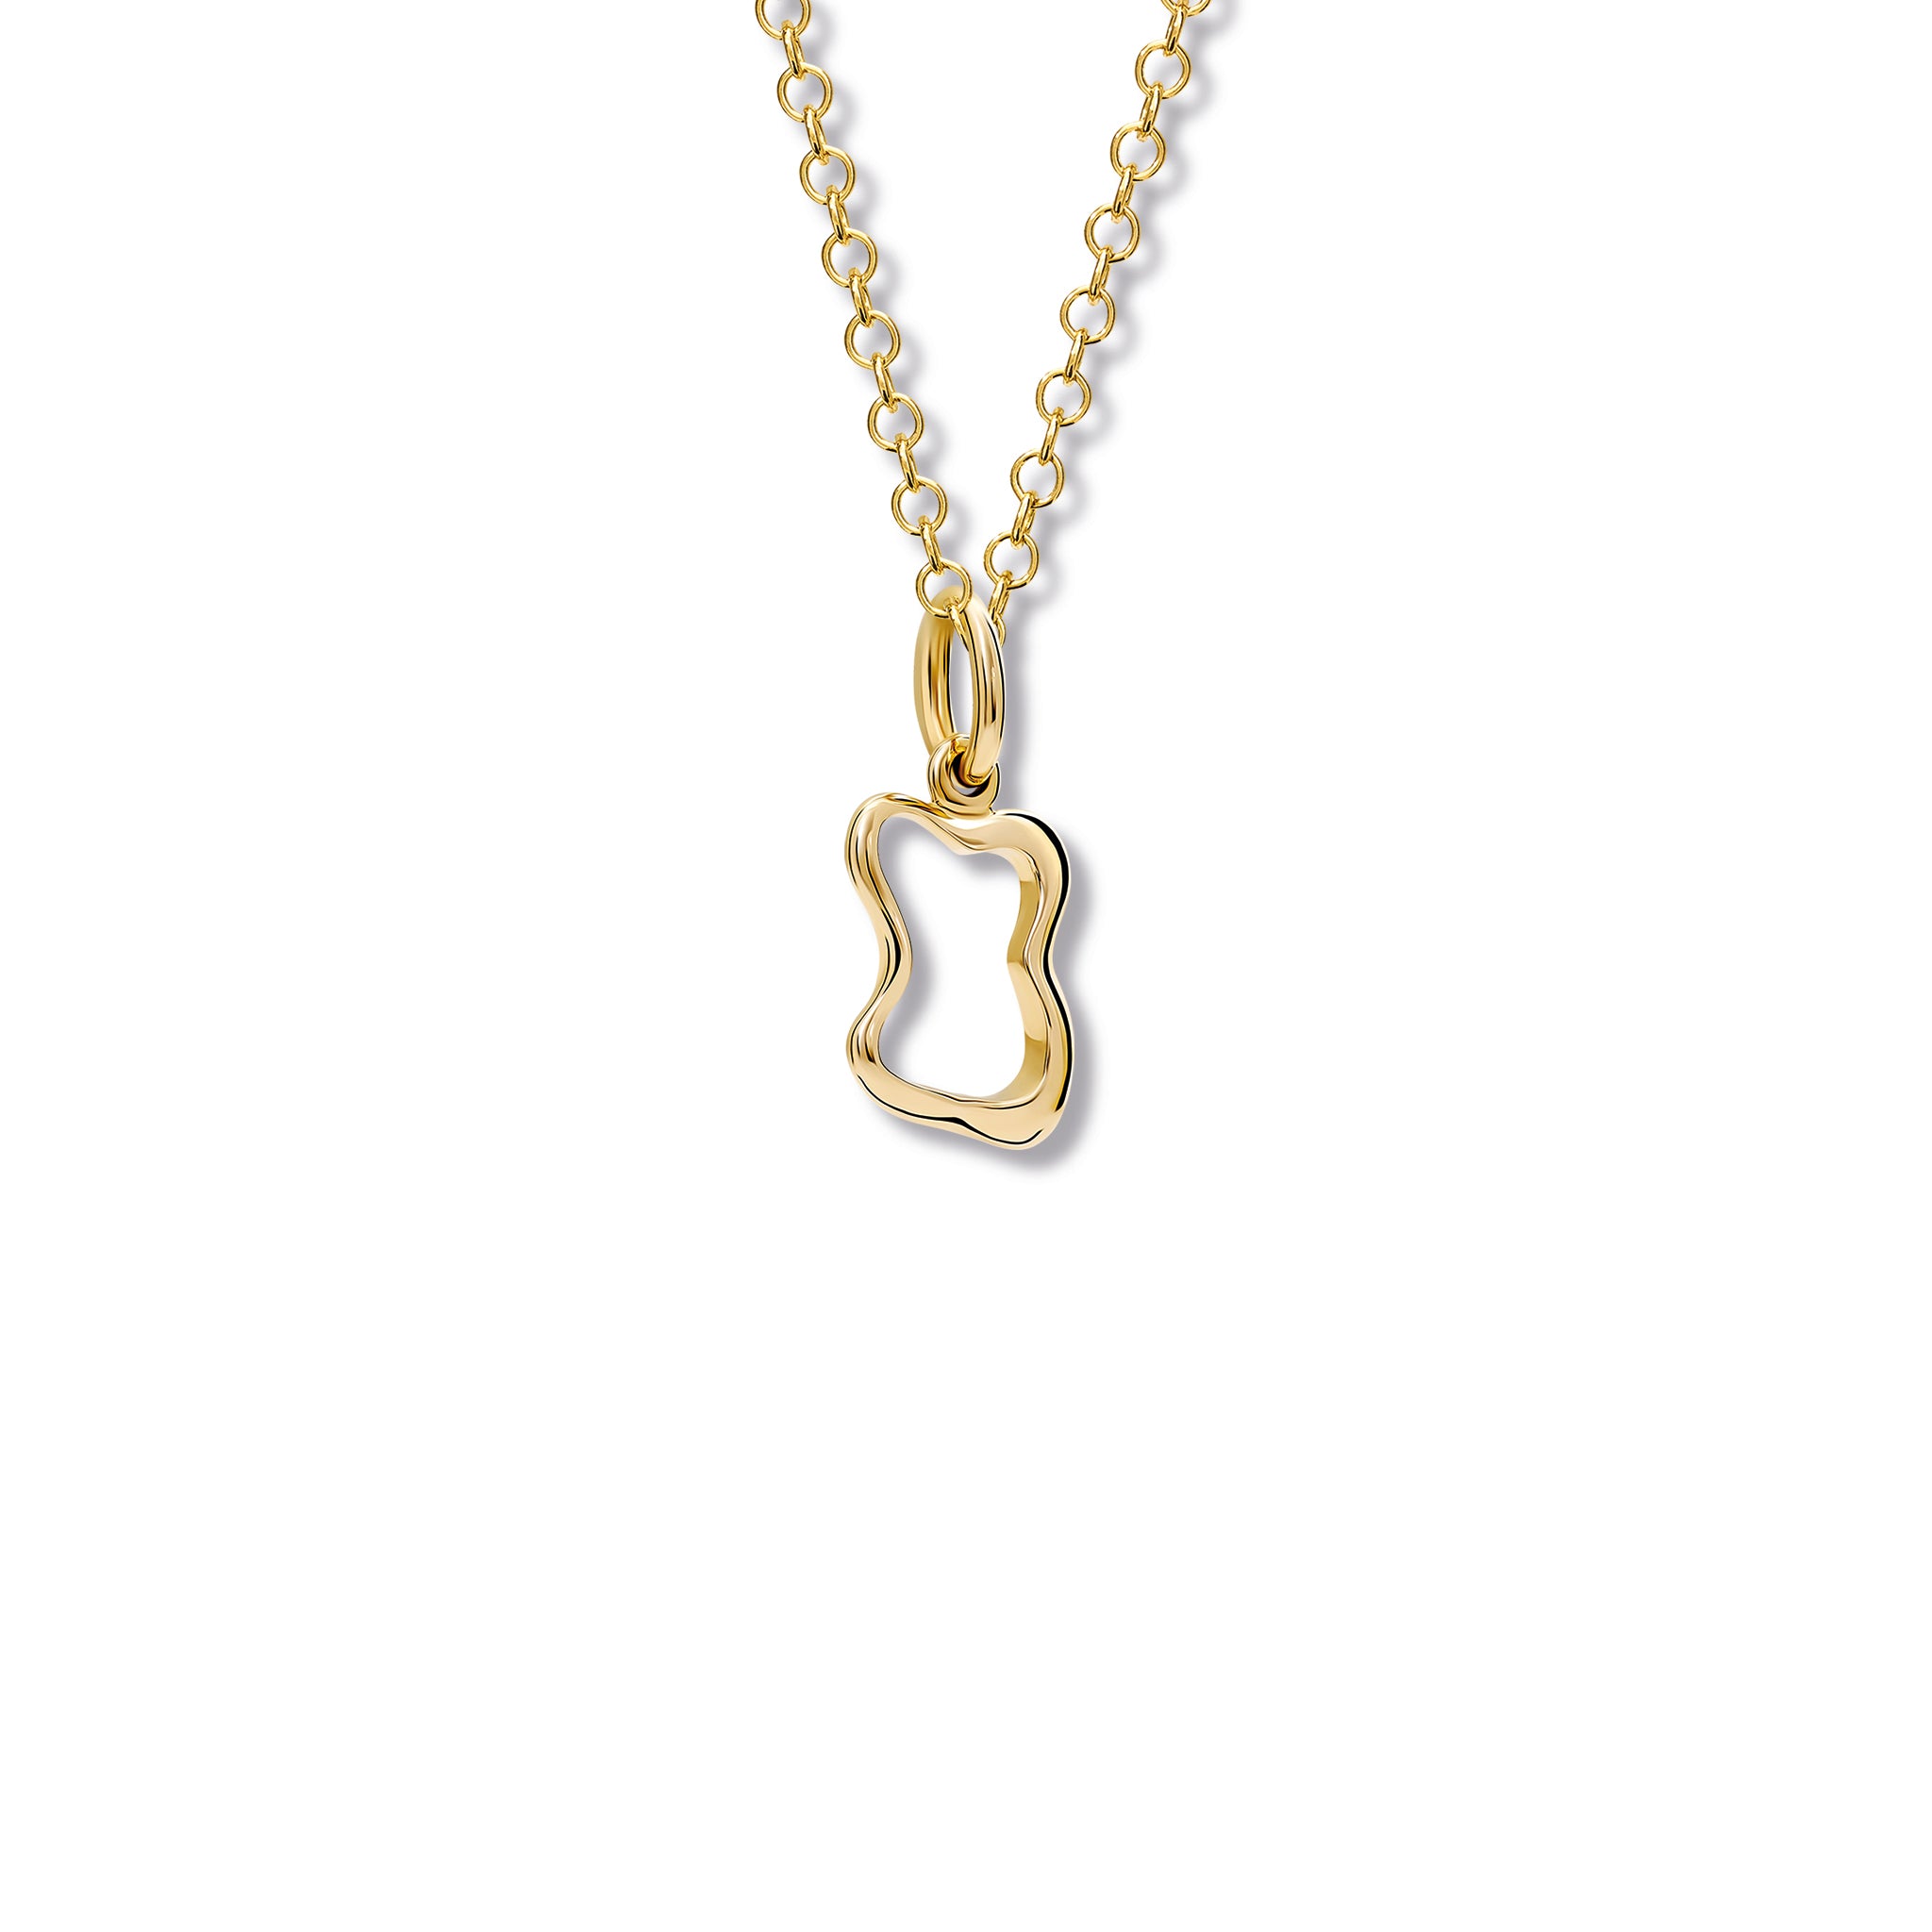 Pâtisserie Small Necklace Pendant Yellow Gold